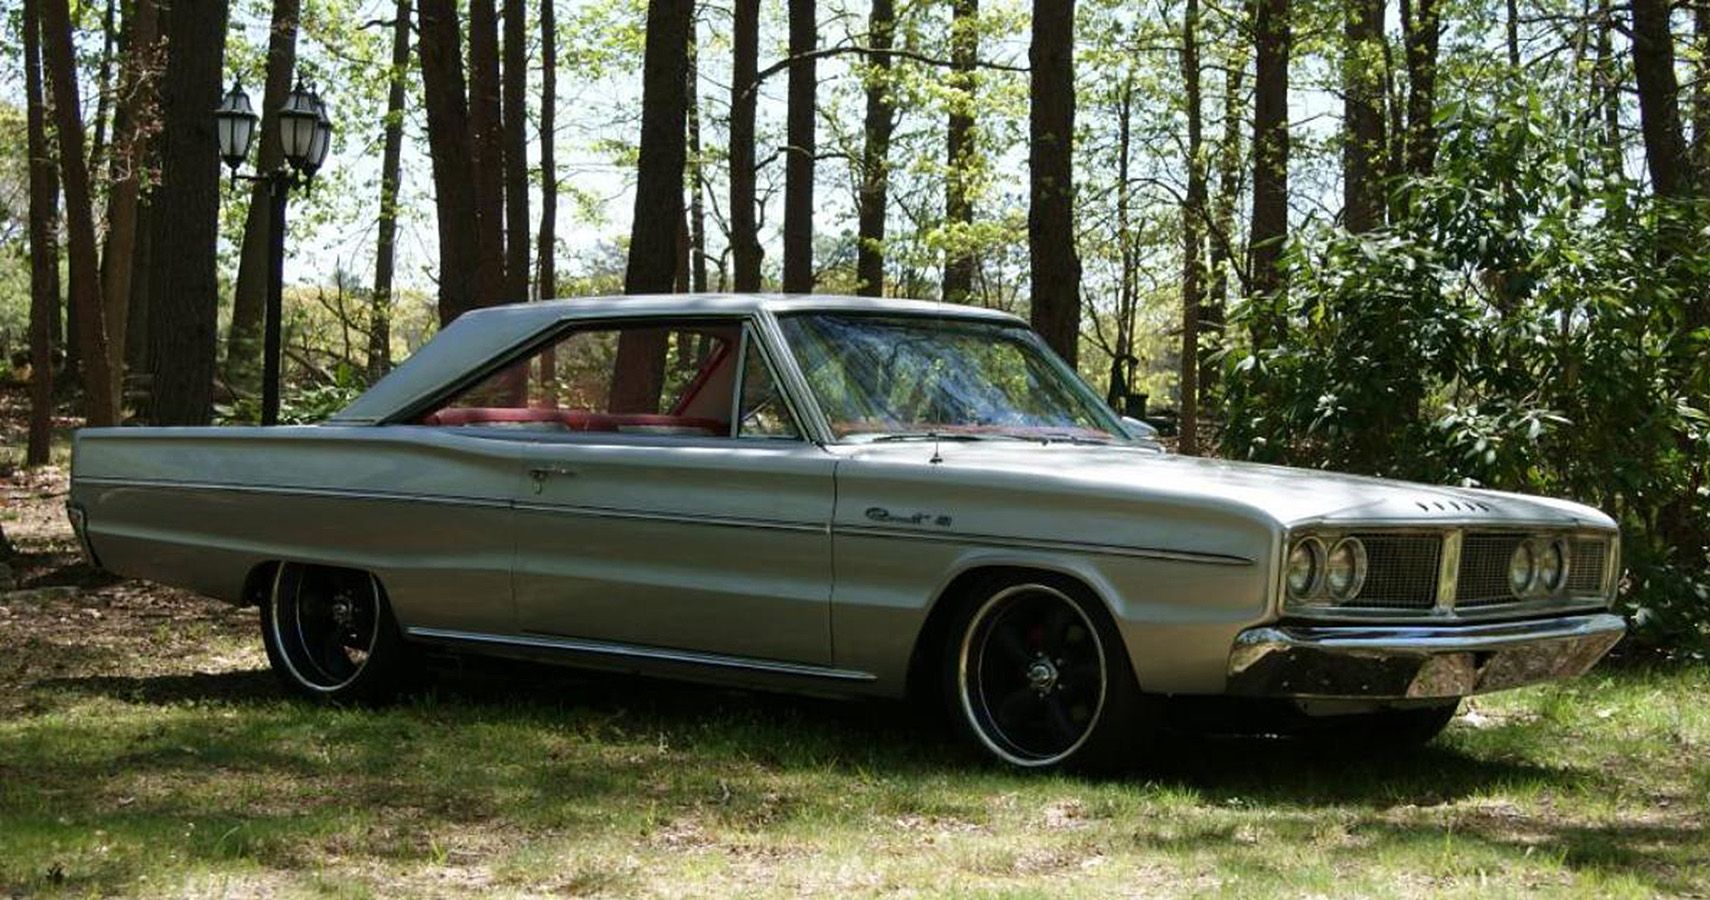 In 1966, The Dodge Coronet Was Redesigned, And The Cars Became Shorter And Wider With Bold Design Cues Like A Mesh Grille With Square Headlamps